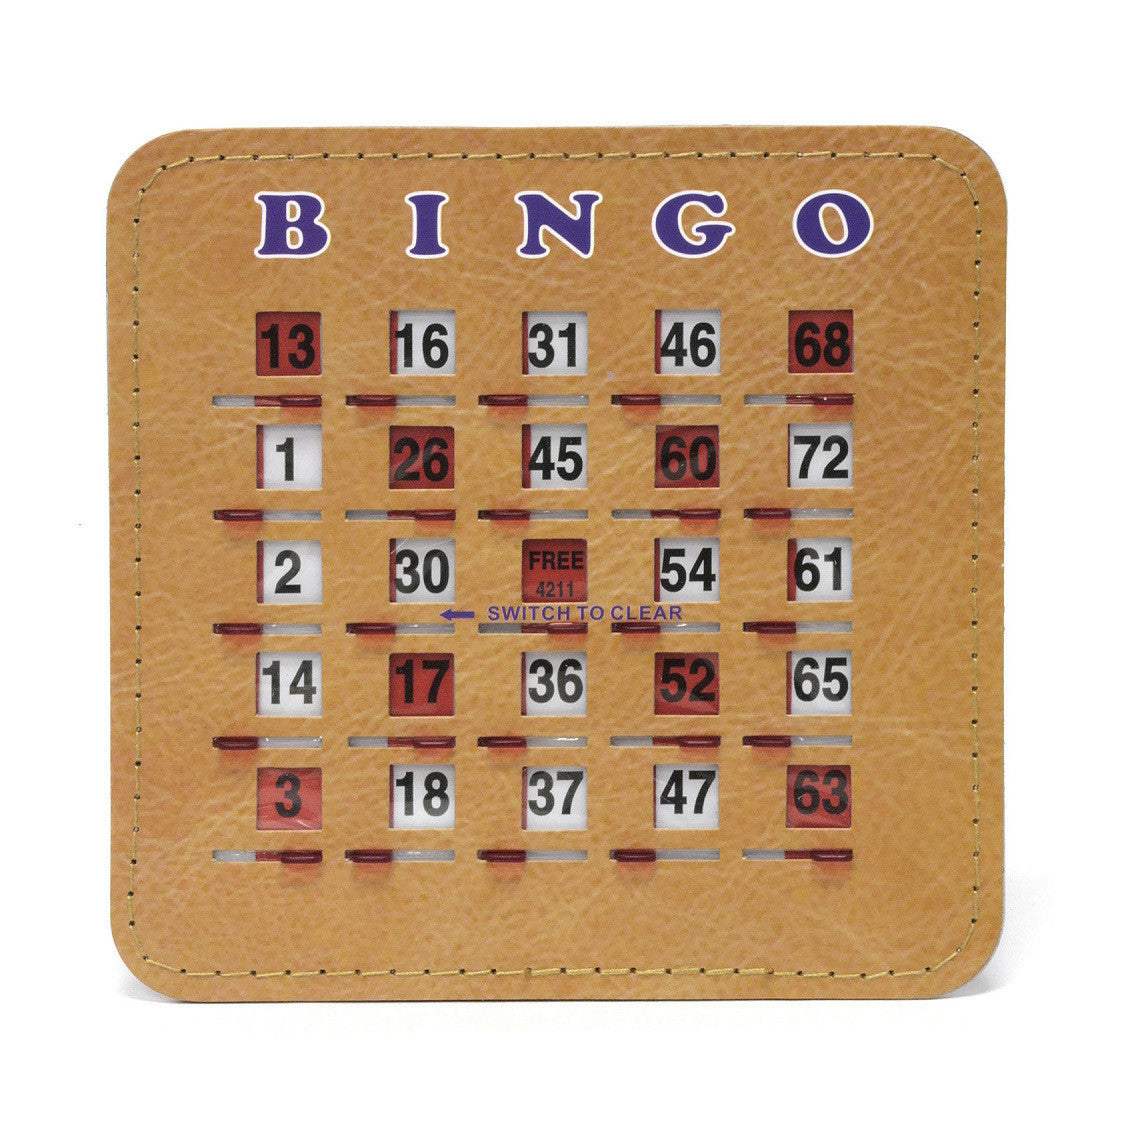 Senior Friendly Tabbed Quick Clear Stitched 5 Ply Bingo Shutter Slide Cards - Casino Supply